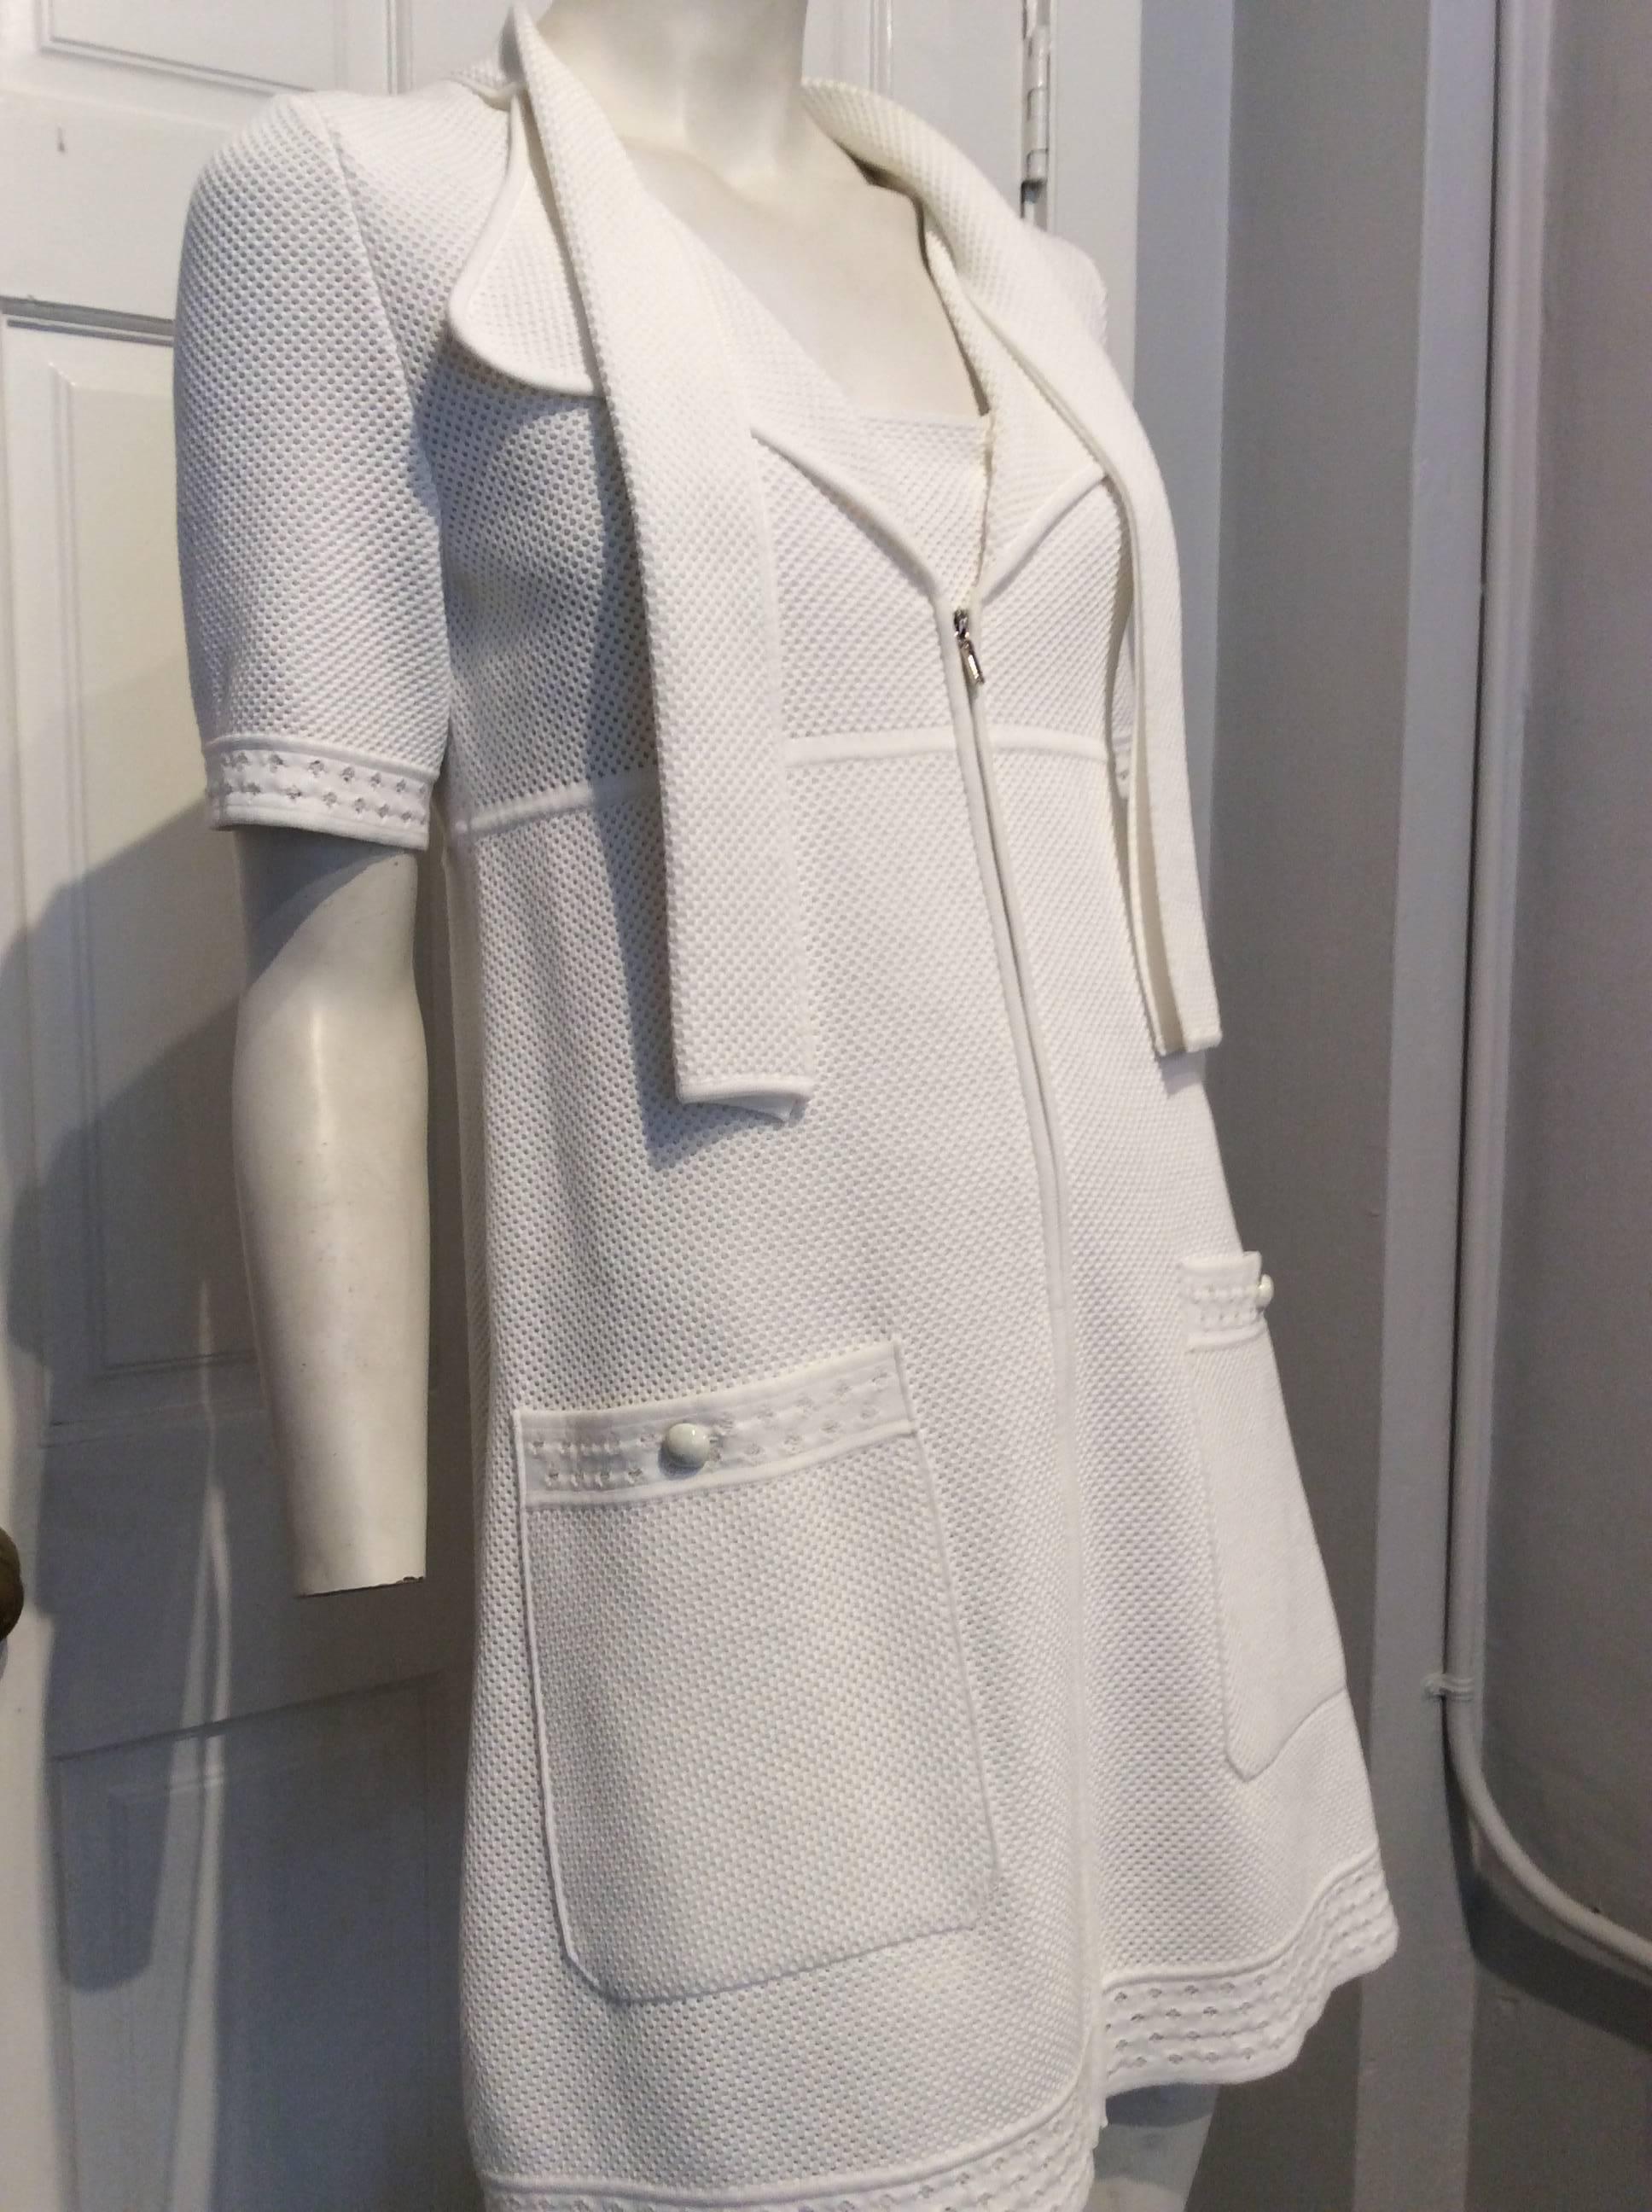 Chanel white cotton pique dress.  This sporty but feminine mini dress has a banded collar that transitions to folded ribbons, that trail to the waist, wide lapels, zip enclosure in front, and a triangular inset at the neckline.  The two square hip